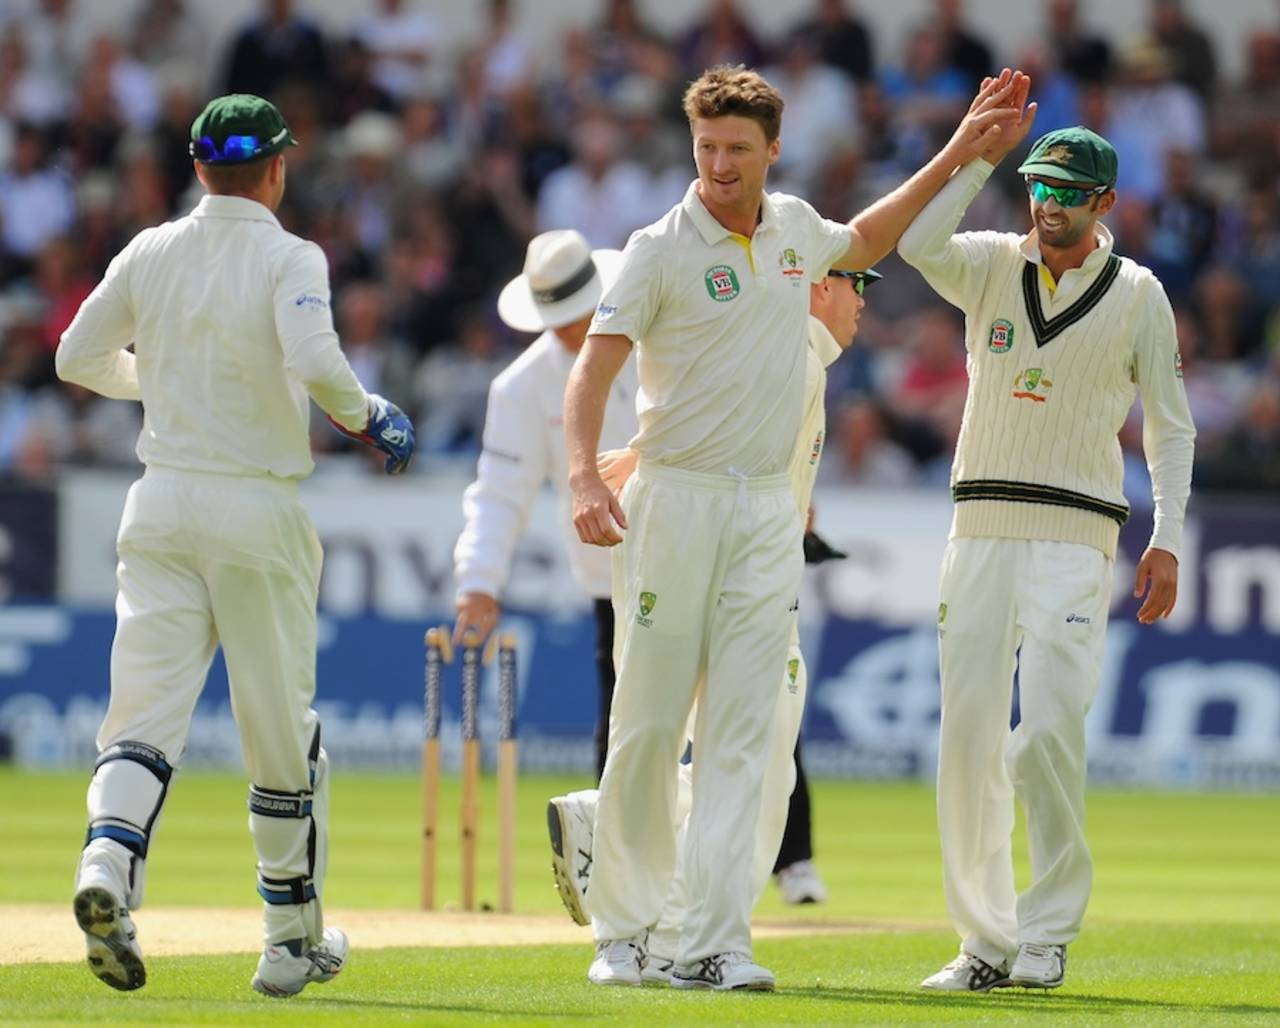 Jackson Bird is congratulated after dismissing James Anderson, England v Australia, 4th Investec Ashes Test, Chester-le-Street, 2nd day, August 10, 2013